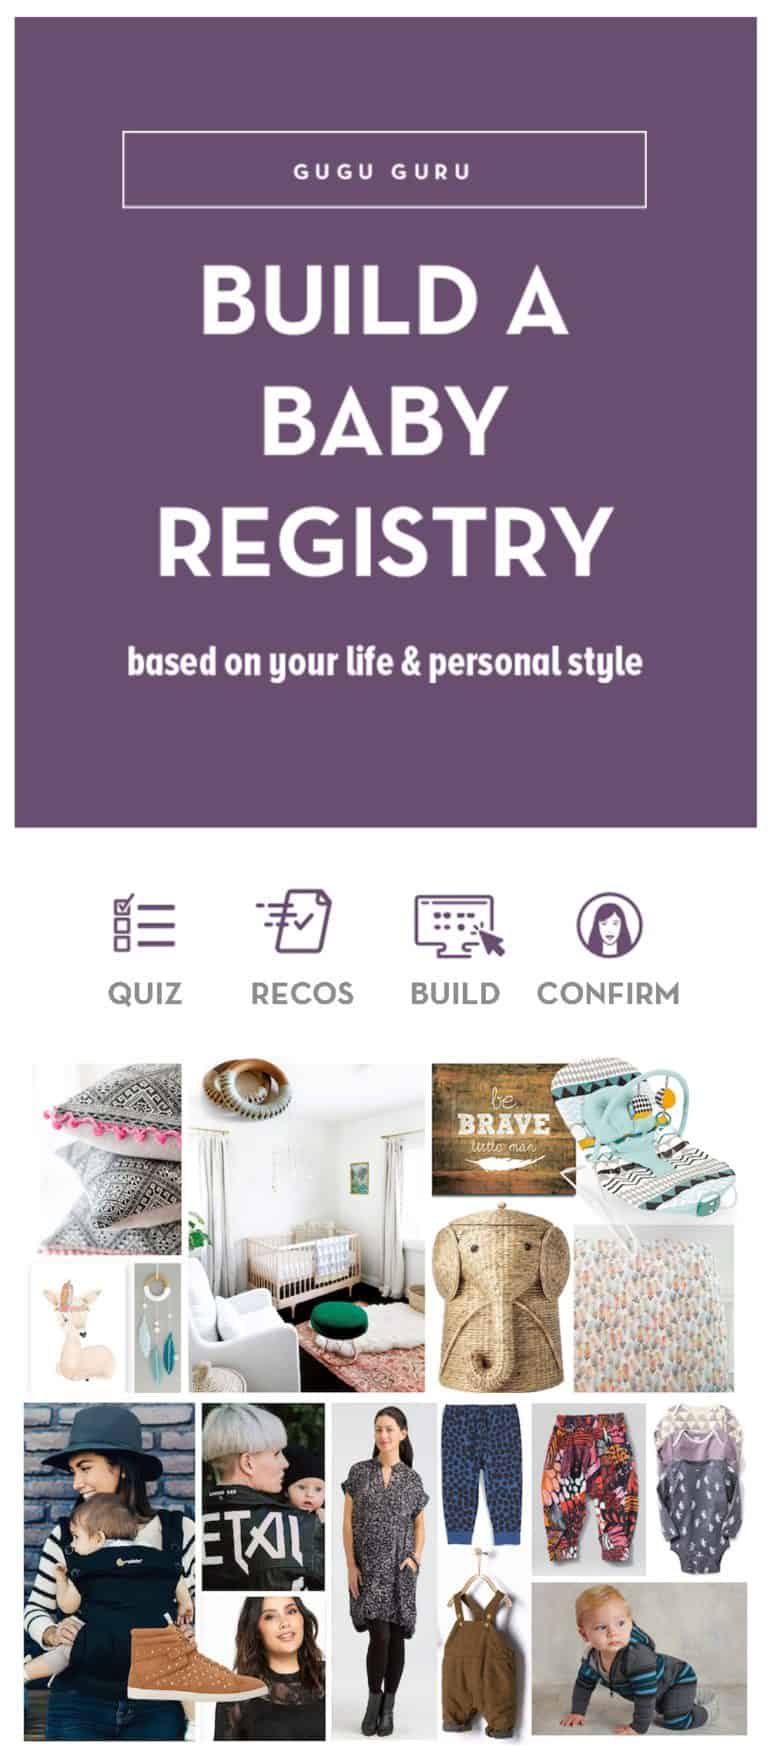 Gugu Guru - a baby registry “discovery" website that helps you build a baby checklist, must-haves and essentials based on your style.